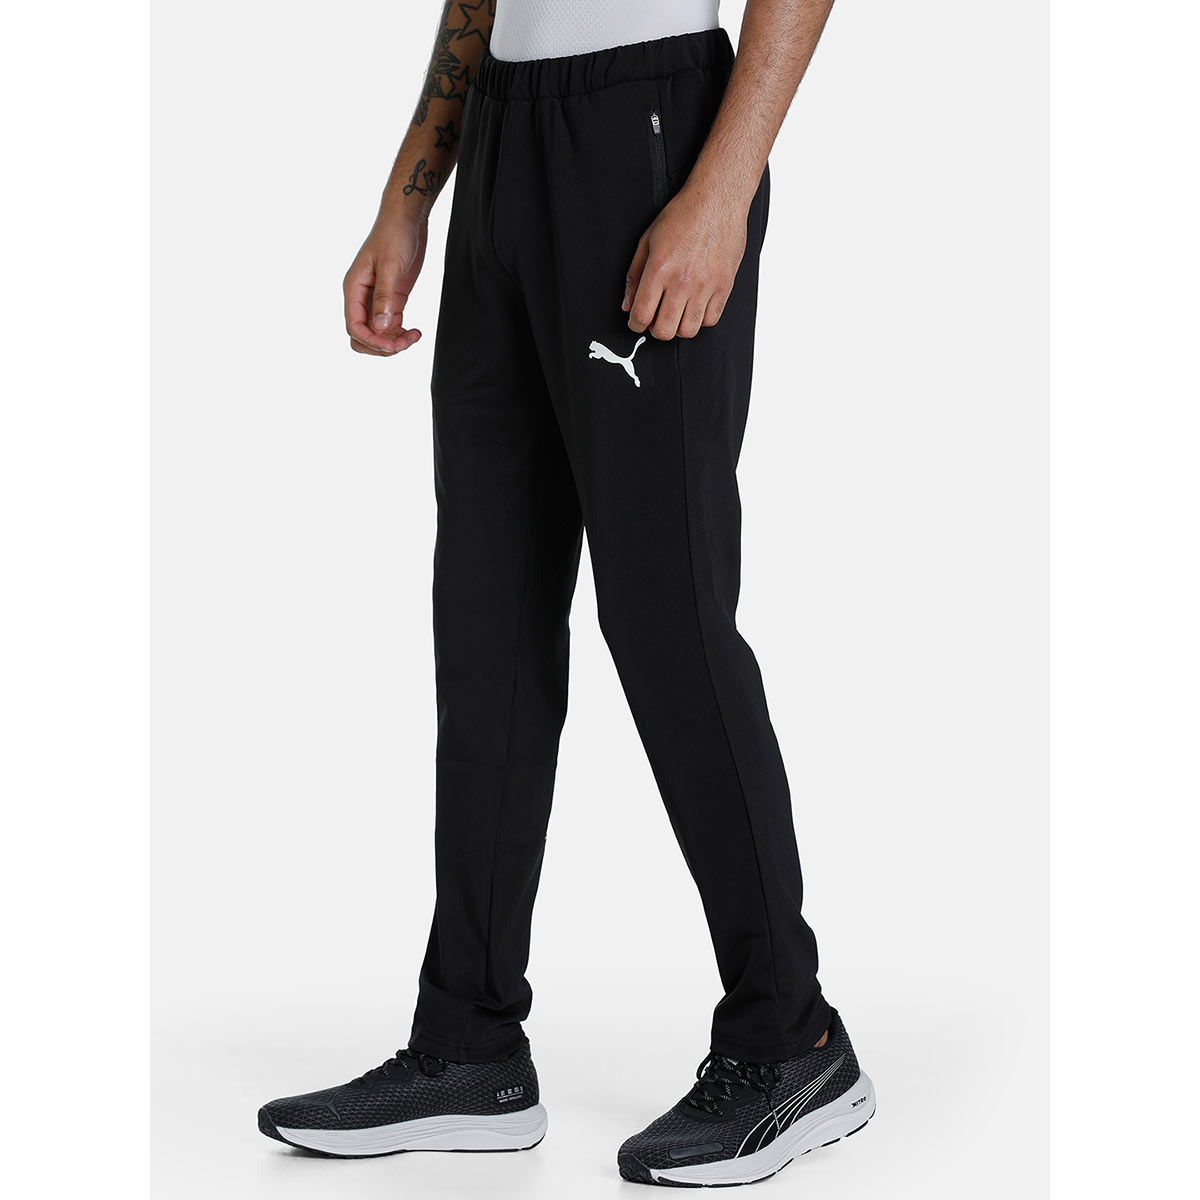 Buy Run Quicky Dry Track Pants Online at Best Prices in India  JioMart